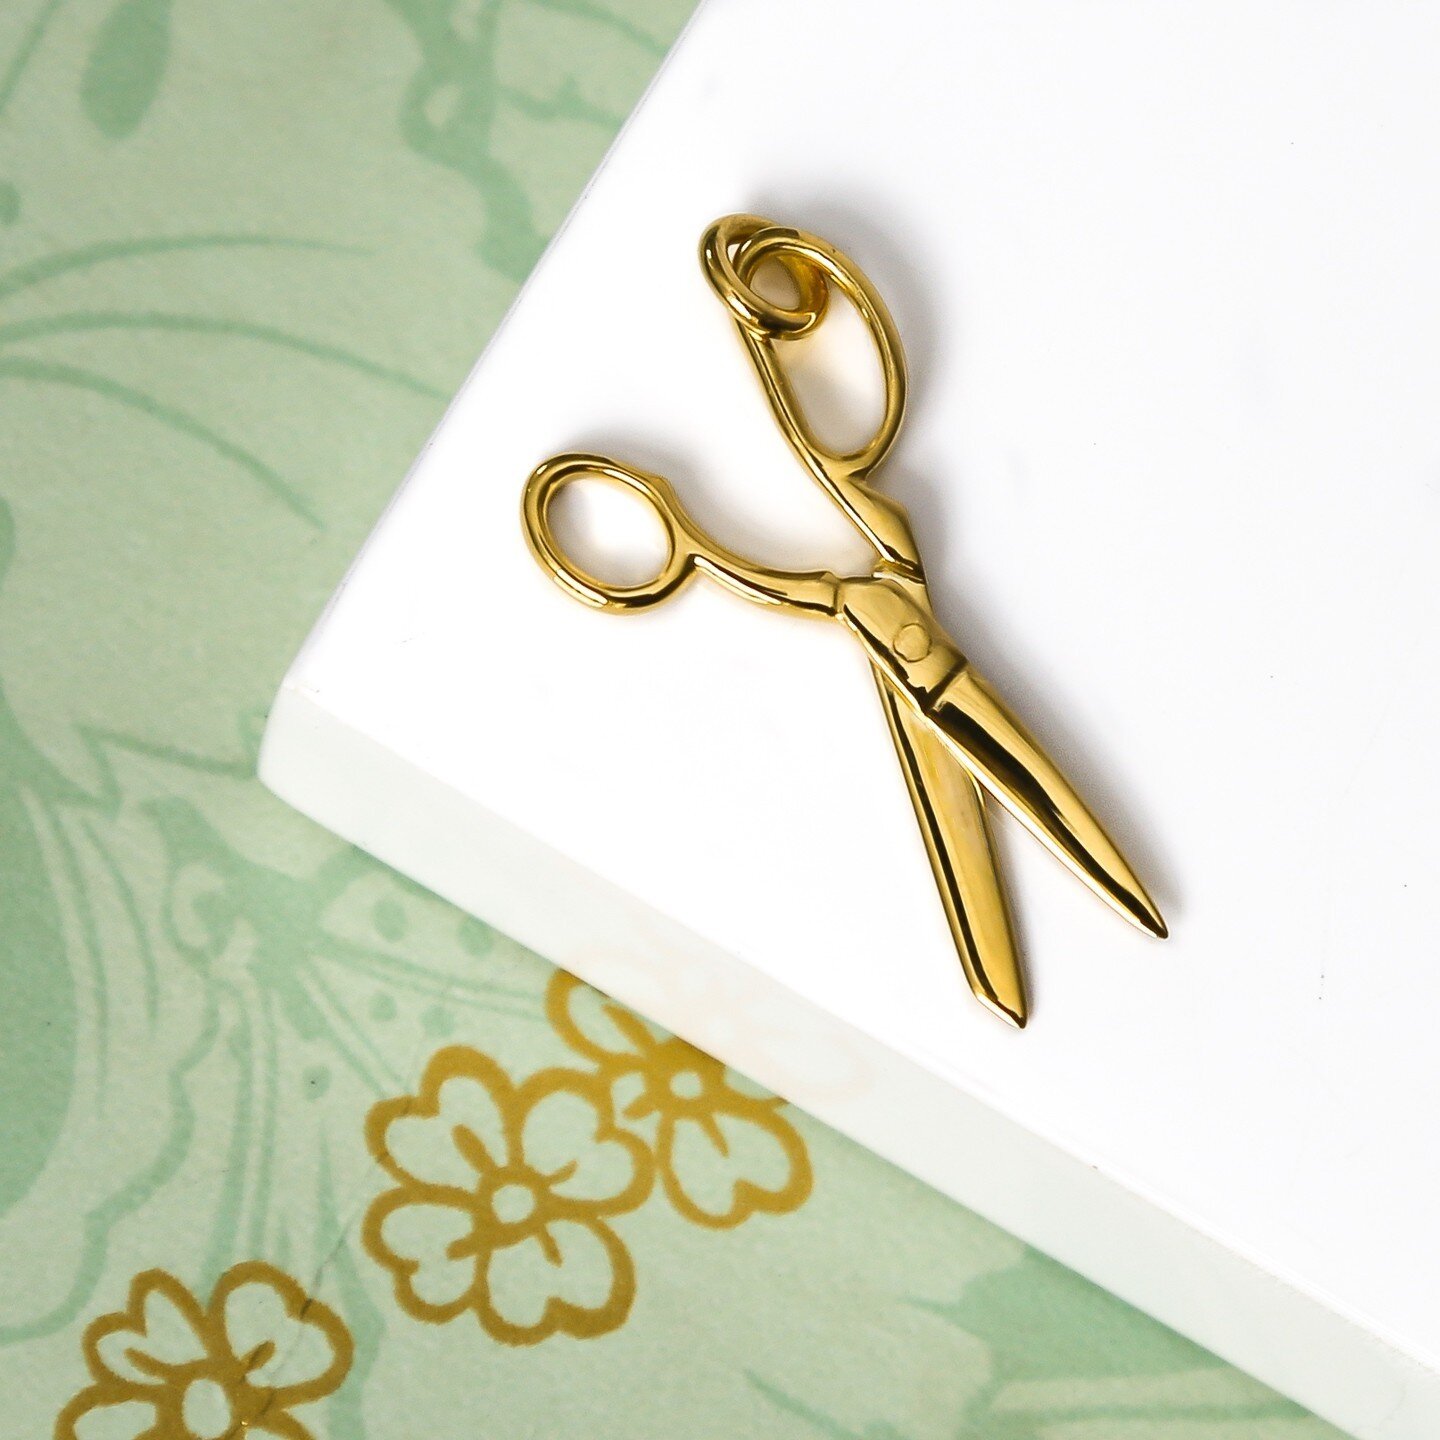 Another custom order - one of my sewing scissors charms in solid 18ct recycled gold.  As all of my jewellery is handmade to order, if you'd like a different metal, gemstones, chain length etc, just let me know and I'll give you a quote!